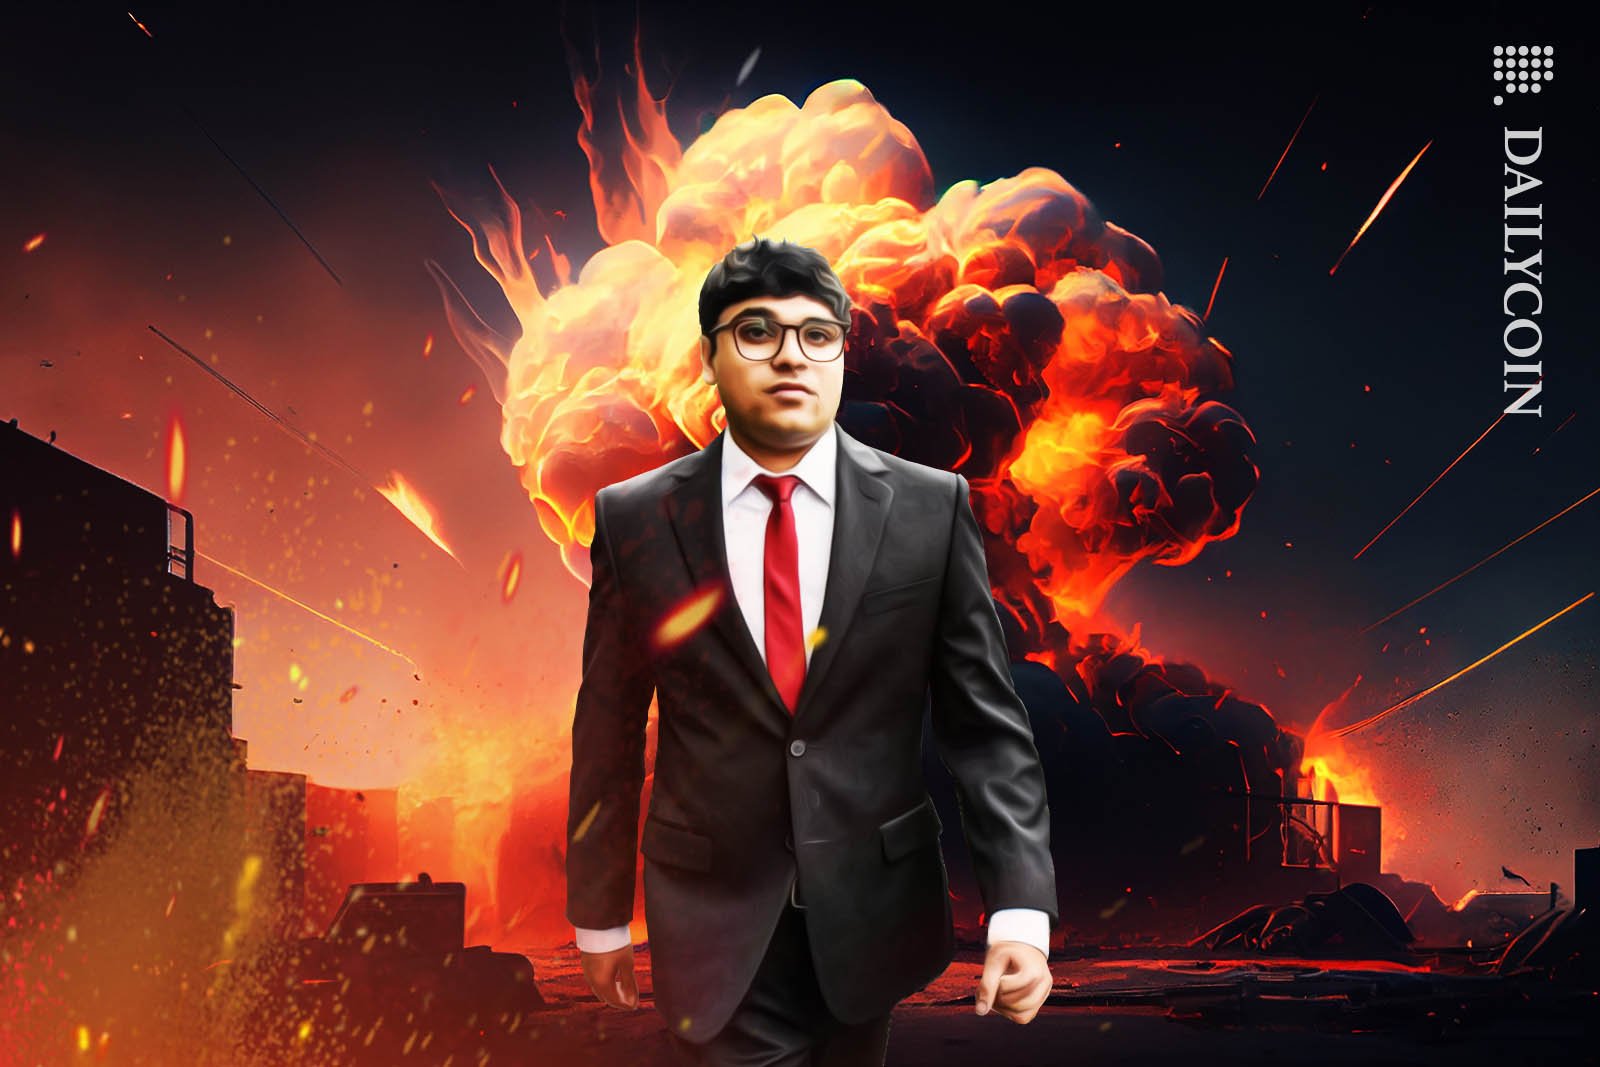 Nishad Singh walking out of a ruined city with explosions, smoke and fire.